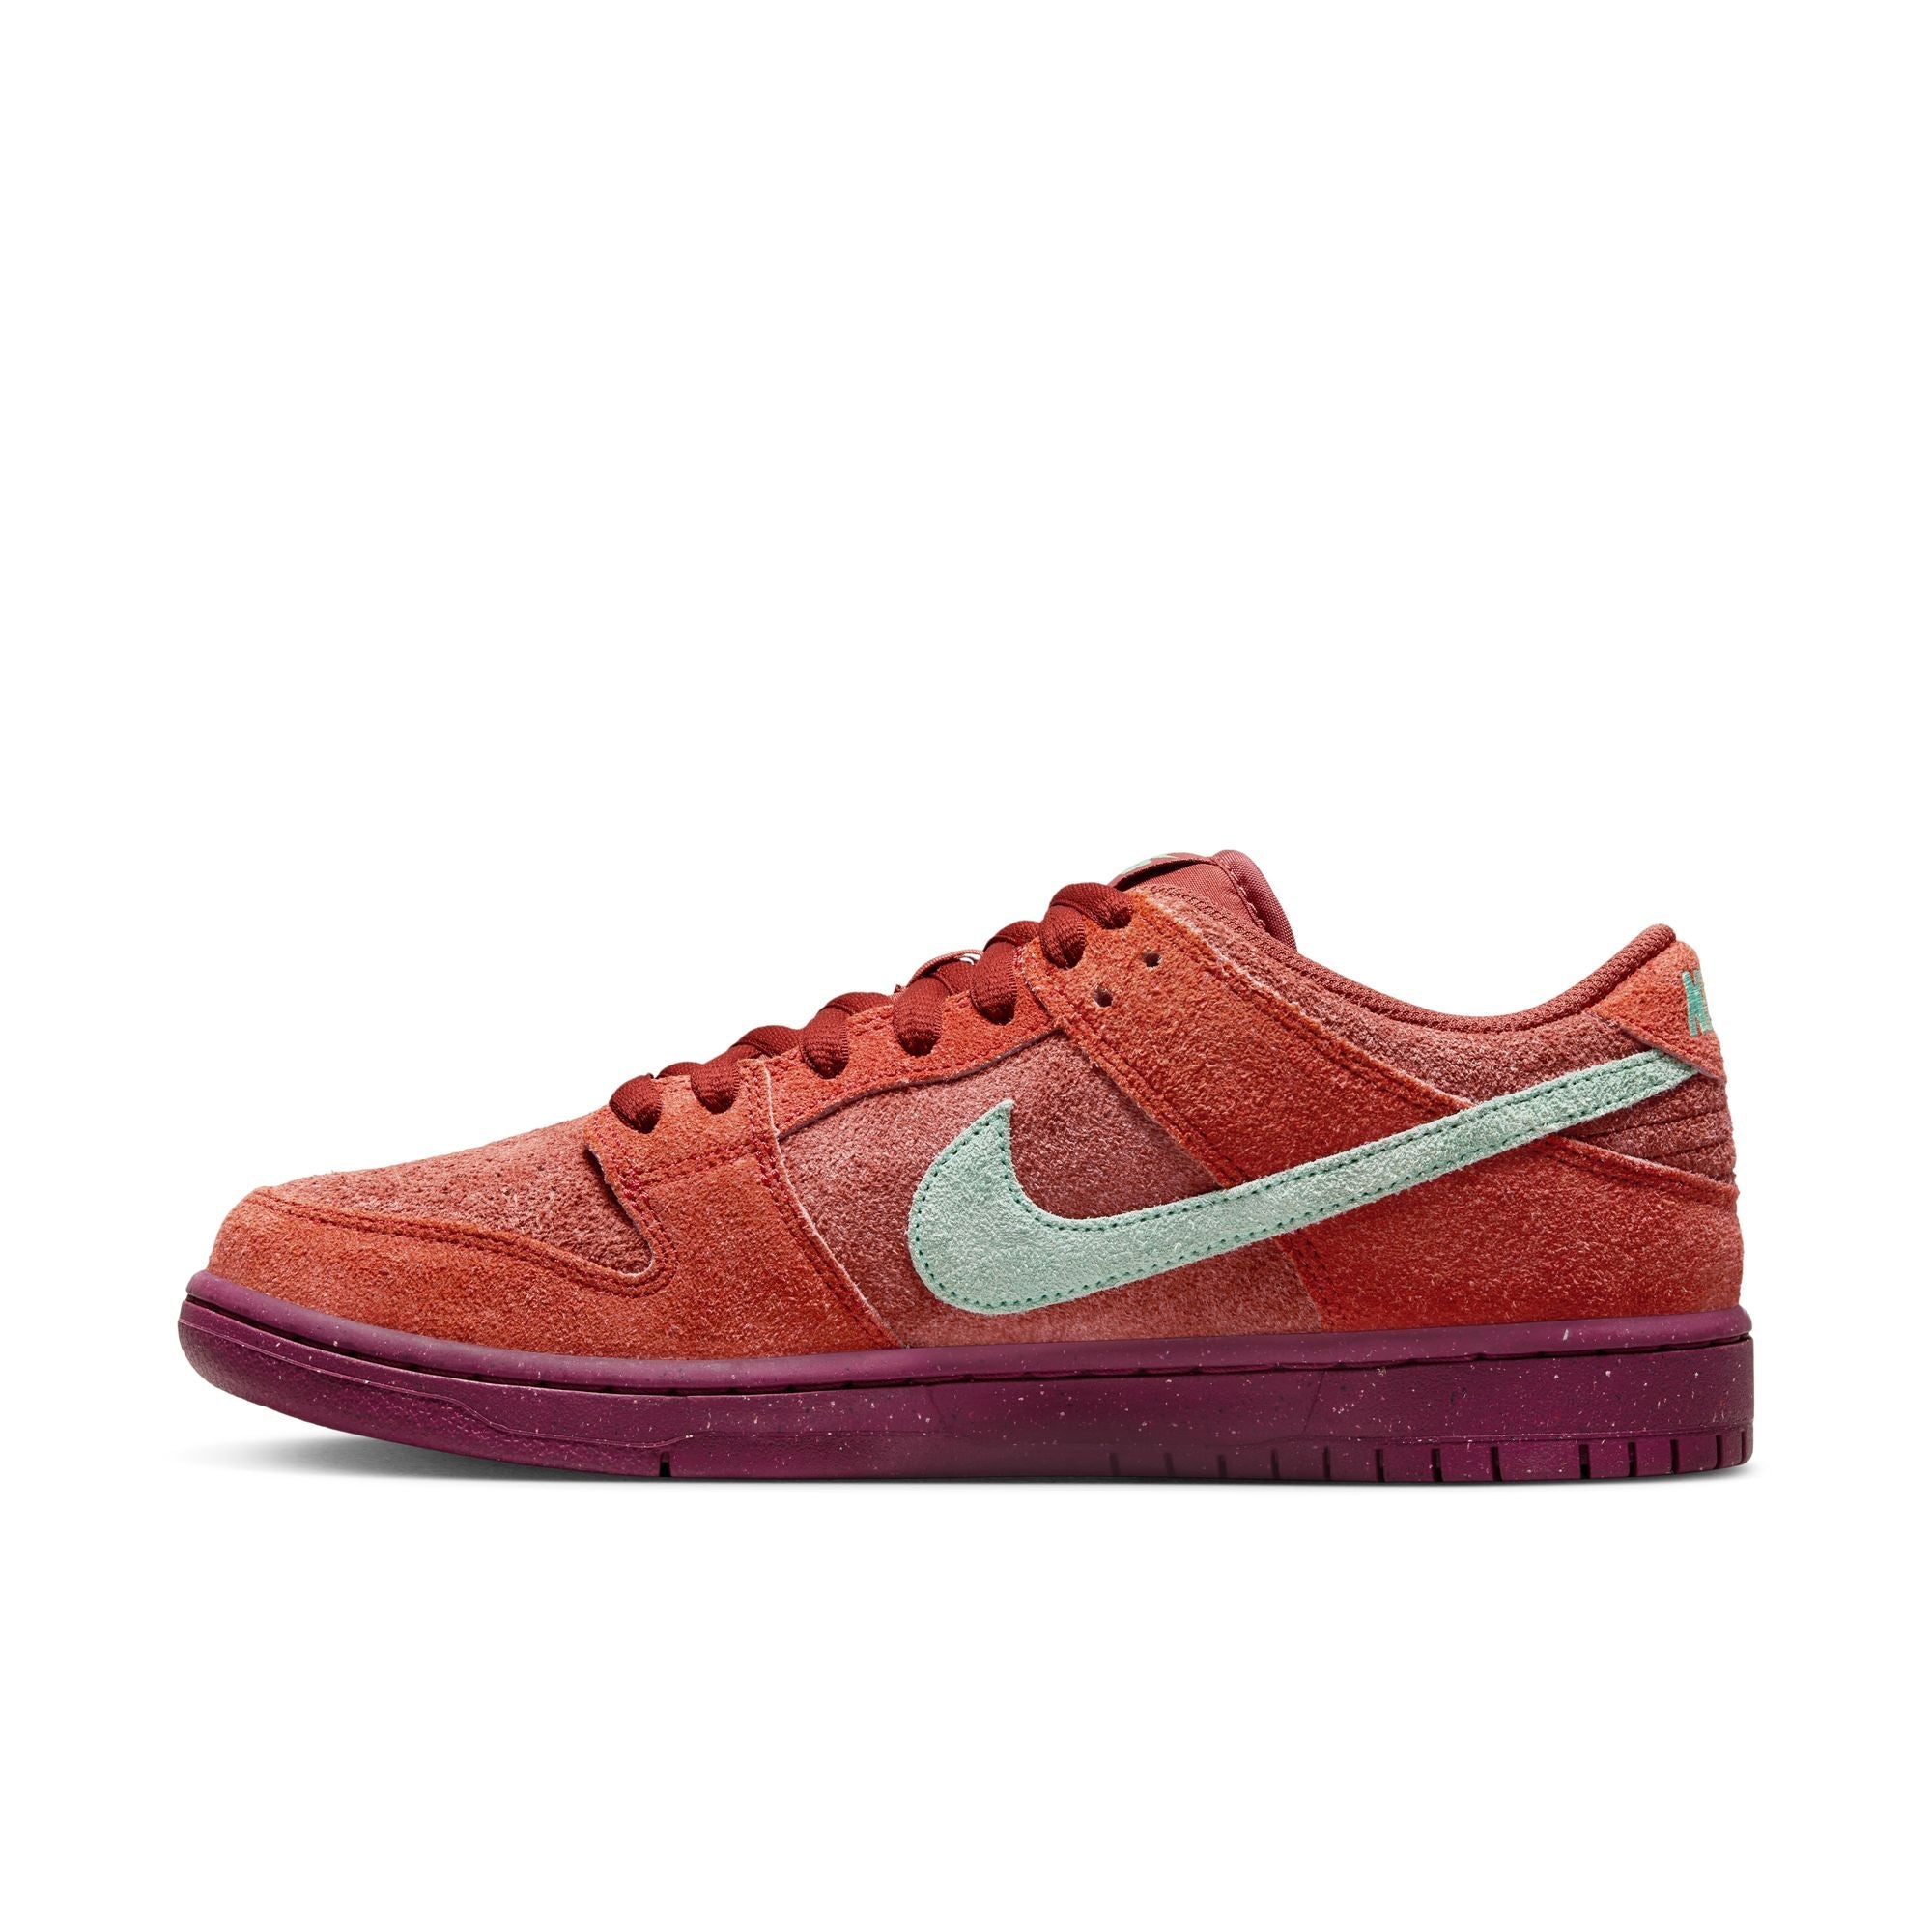 DUNK LOW PRO "MYSTIC RED"